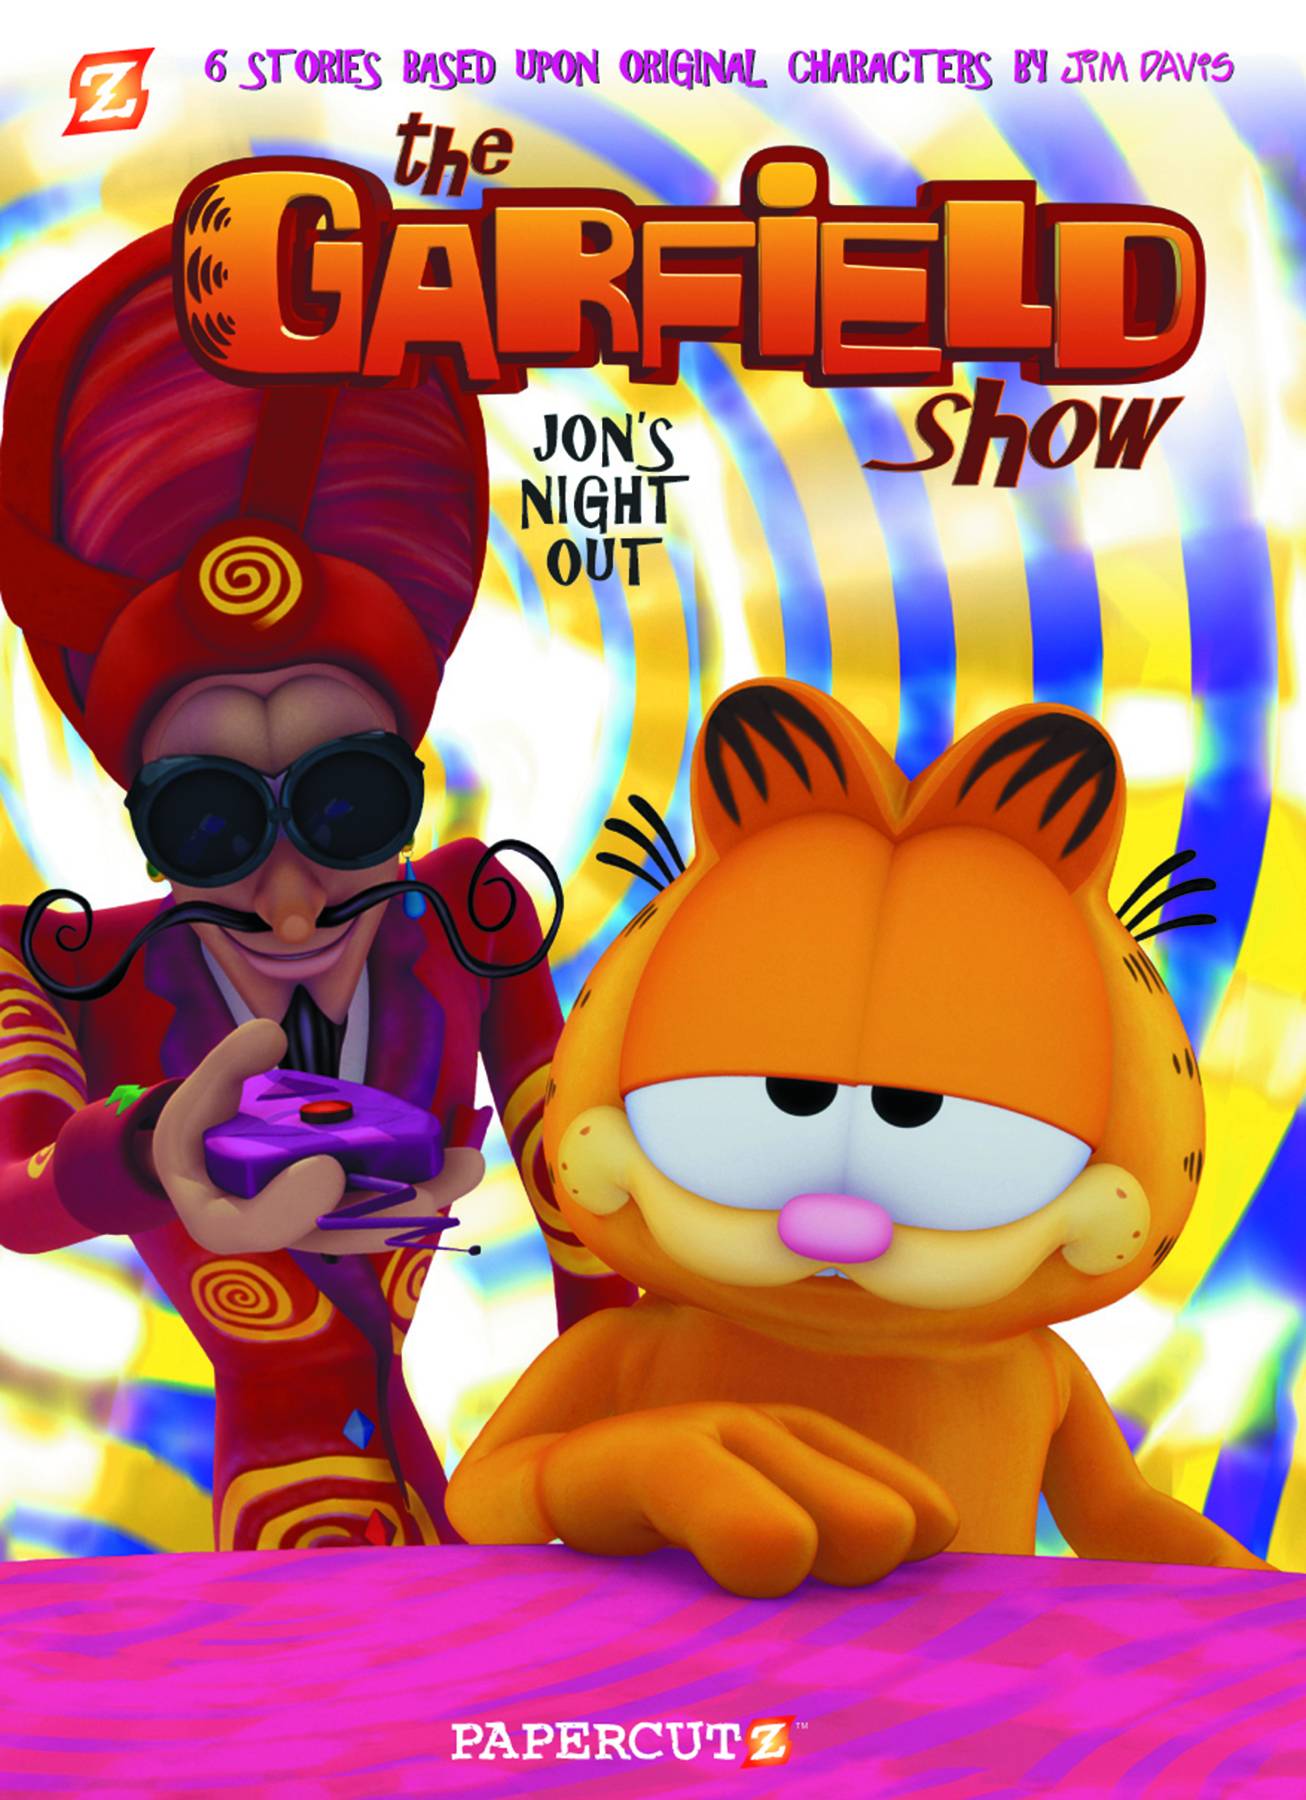 Garfield Show Hardcover Volume 2 Jons Night Out